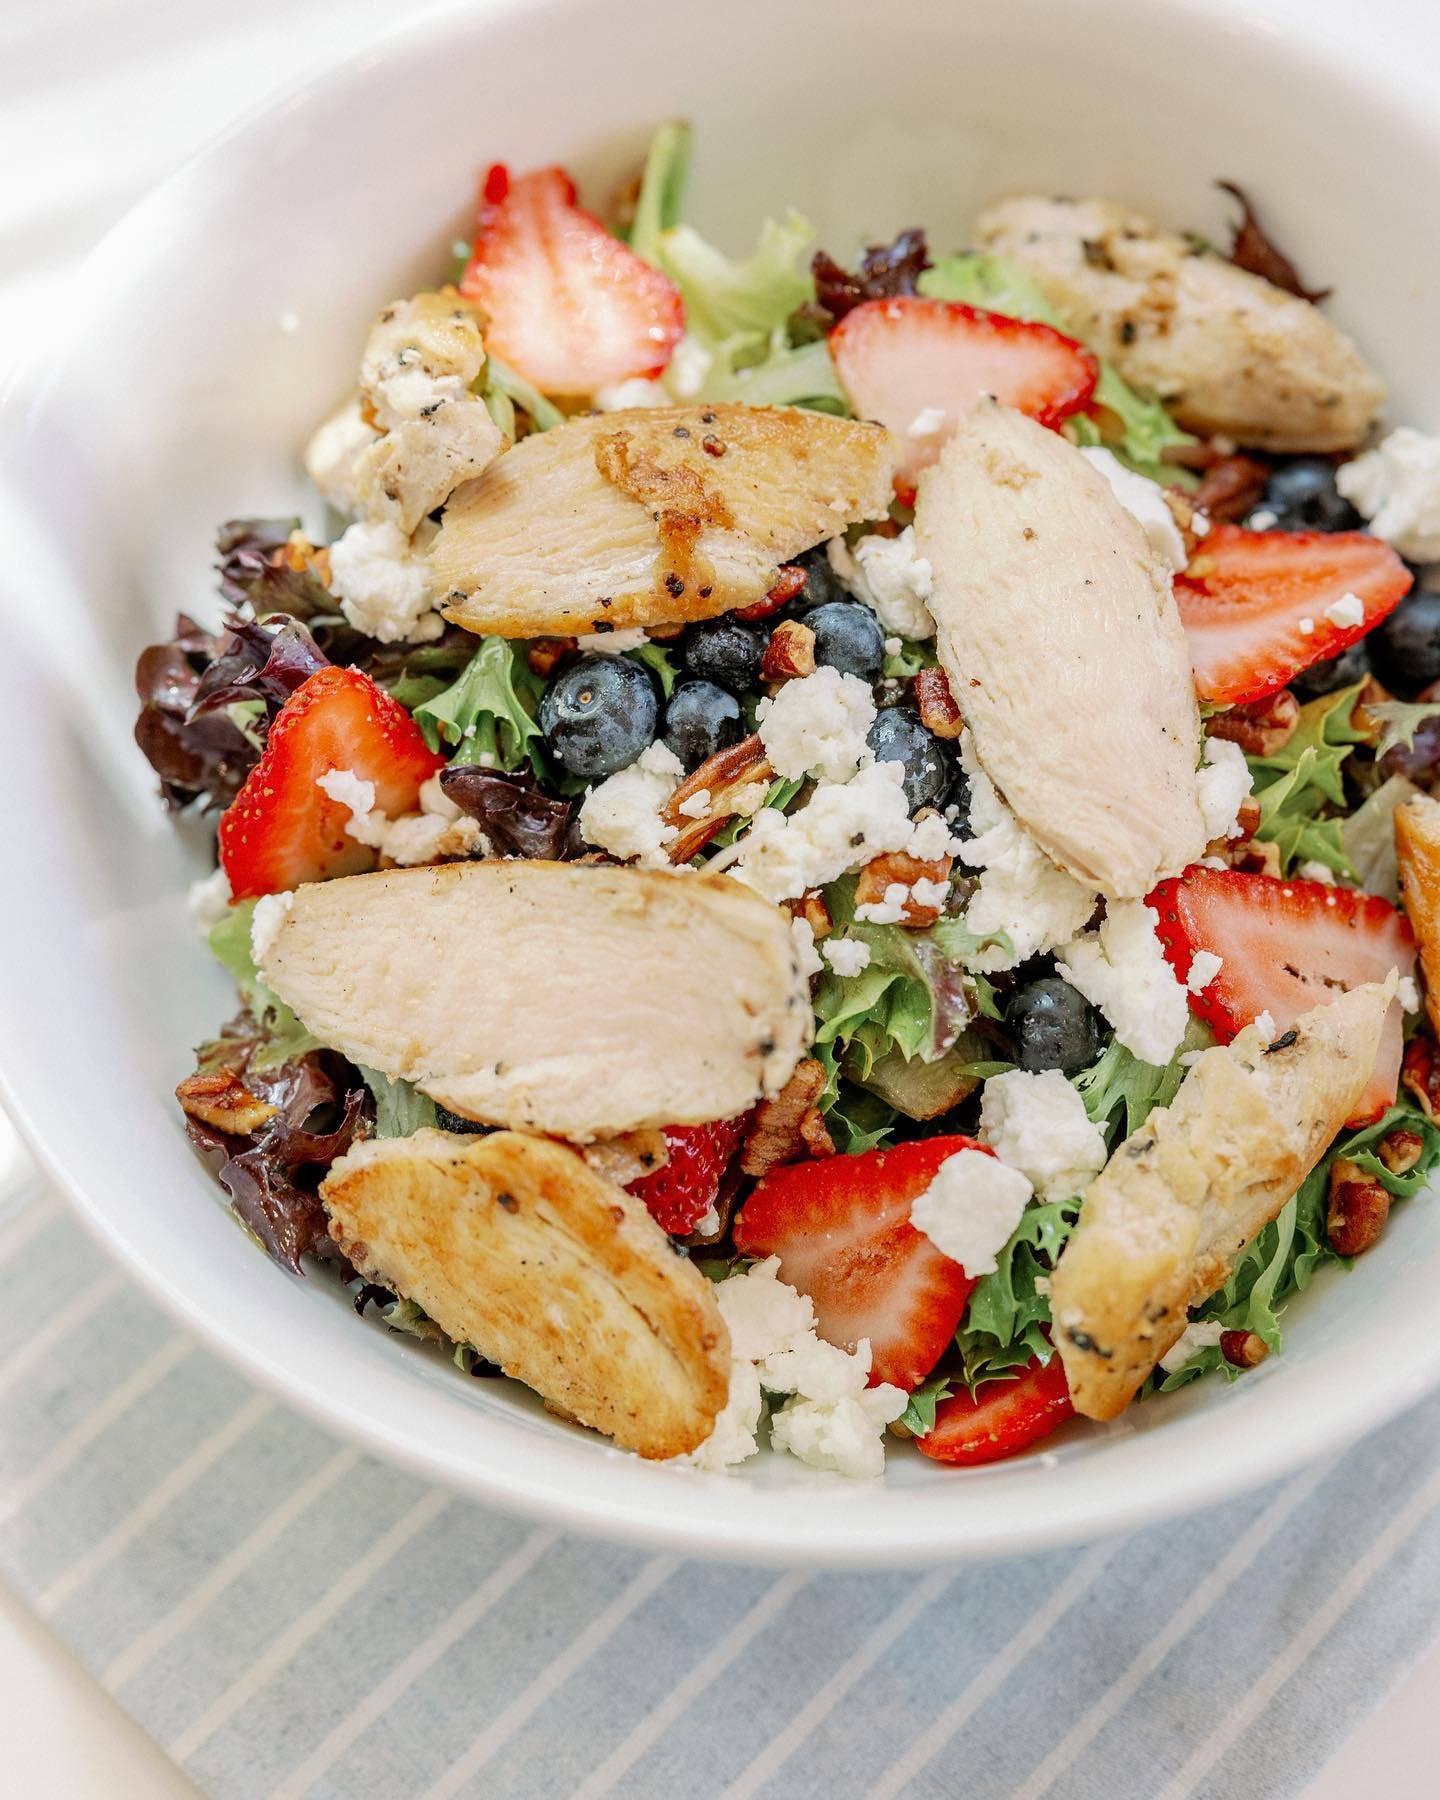 Menu spotlight! Our fresh and flavorful Berry Salad is the perfect warm weather lunch. A burst of bright colors on a bed of local green mix, this blend of strawberries, blueberries, roasted pecans and goat cheese will energize your day! Eat it as-is 